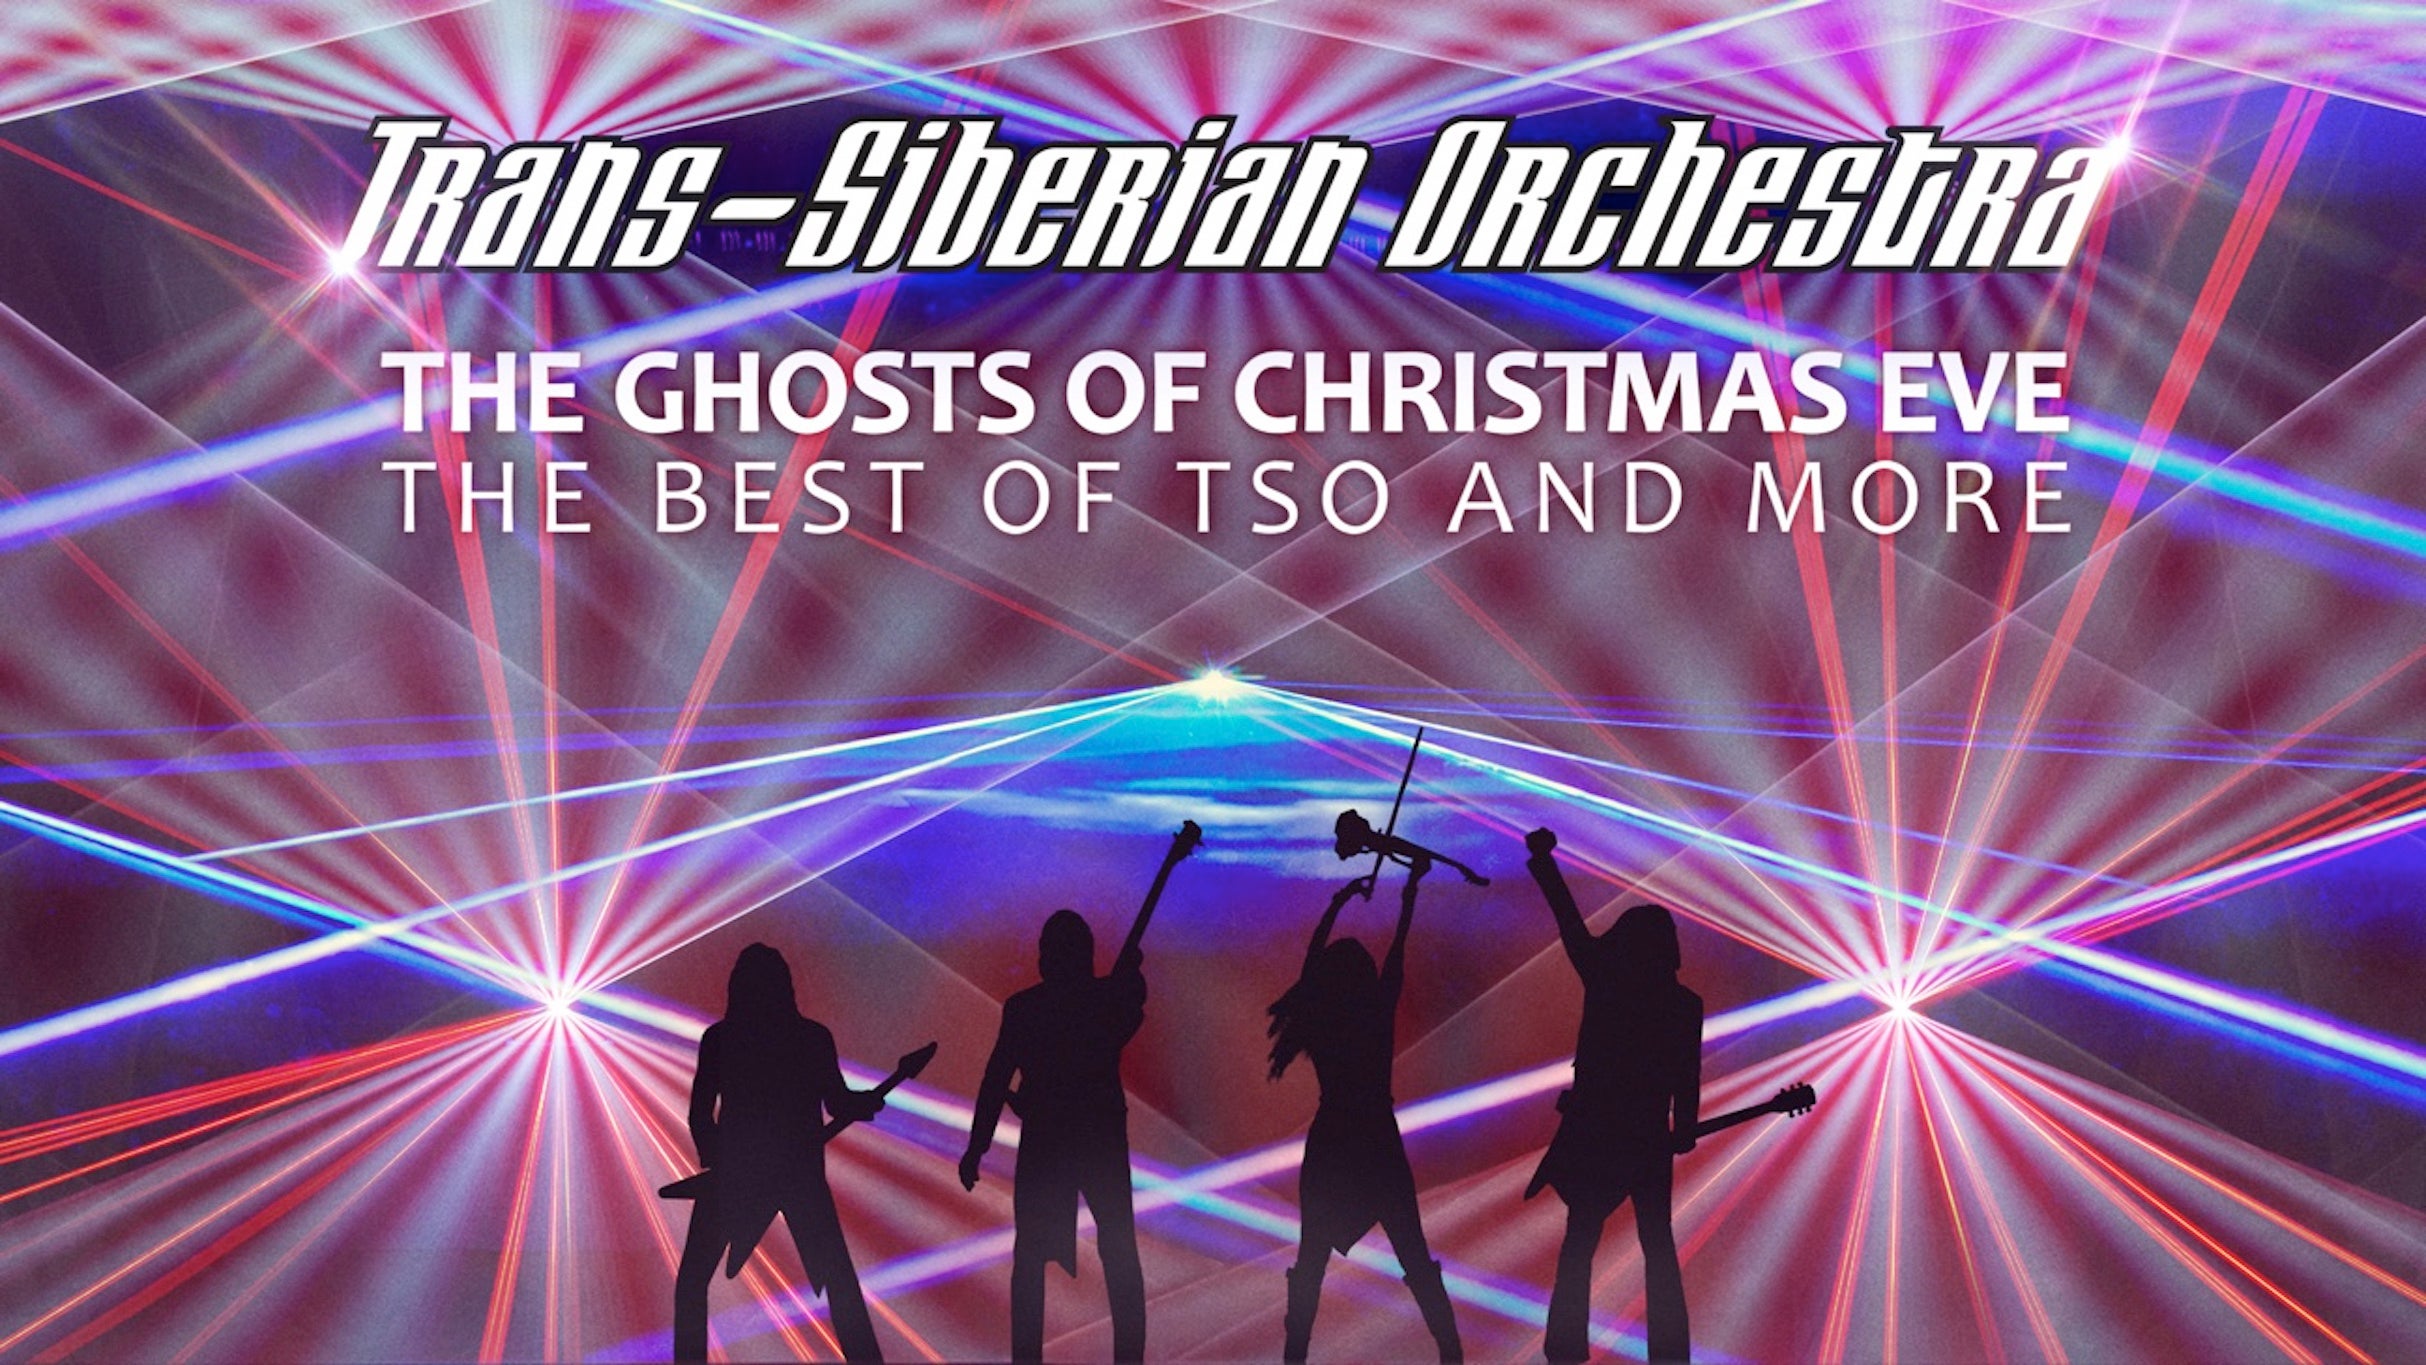 Trans-Siberian Orchestra - The Ghosts Of Christmas Eve presale password for advance tickets in Milwaukee